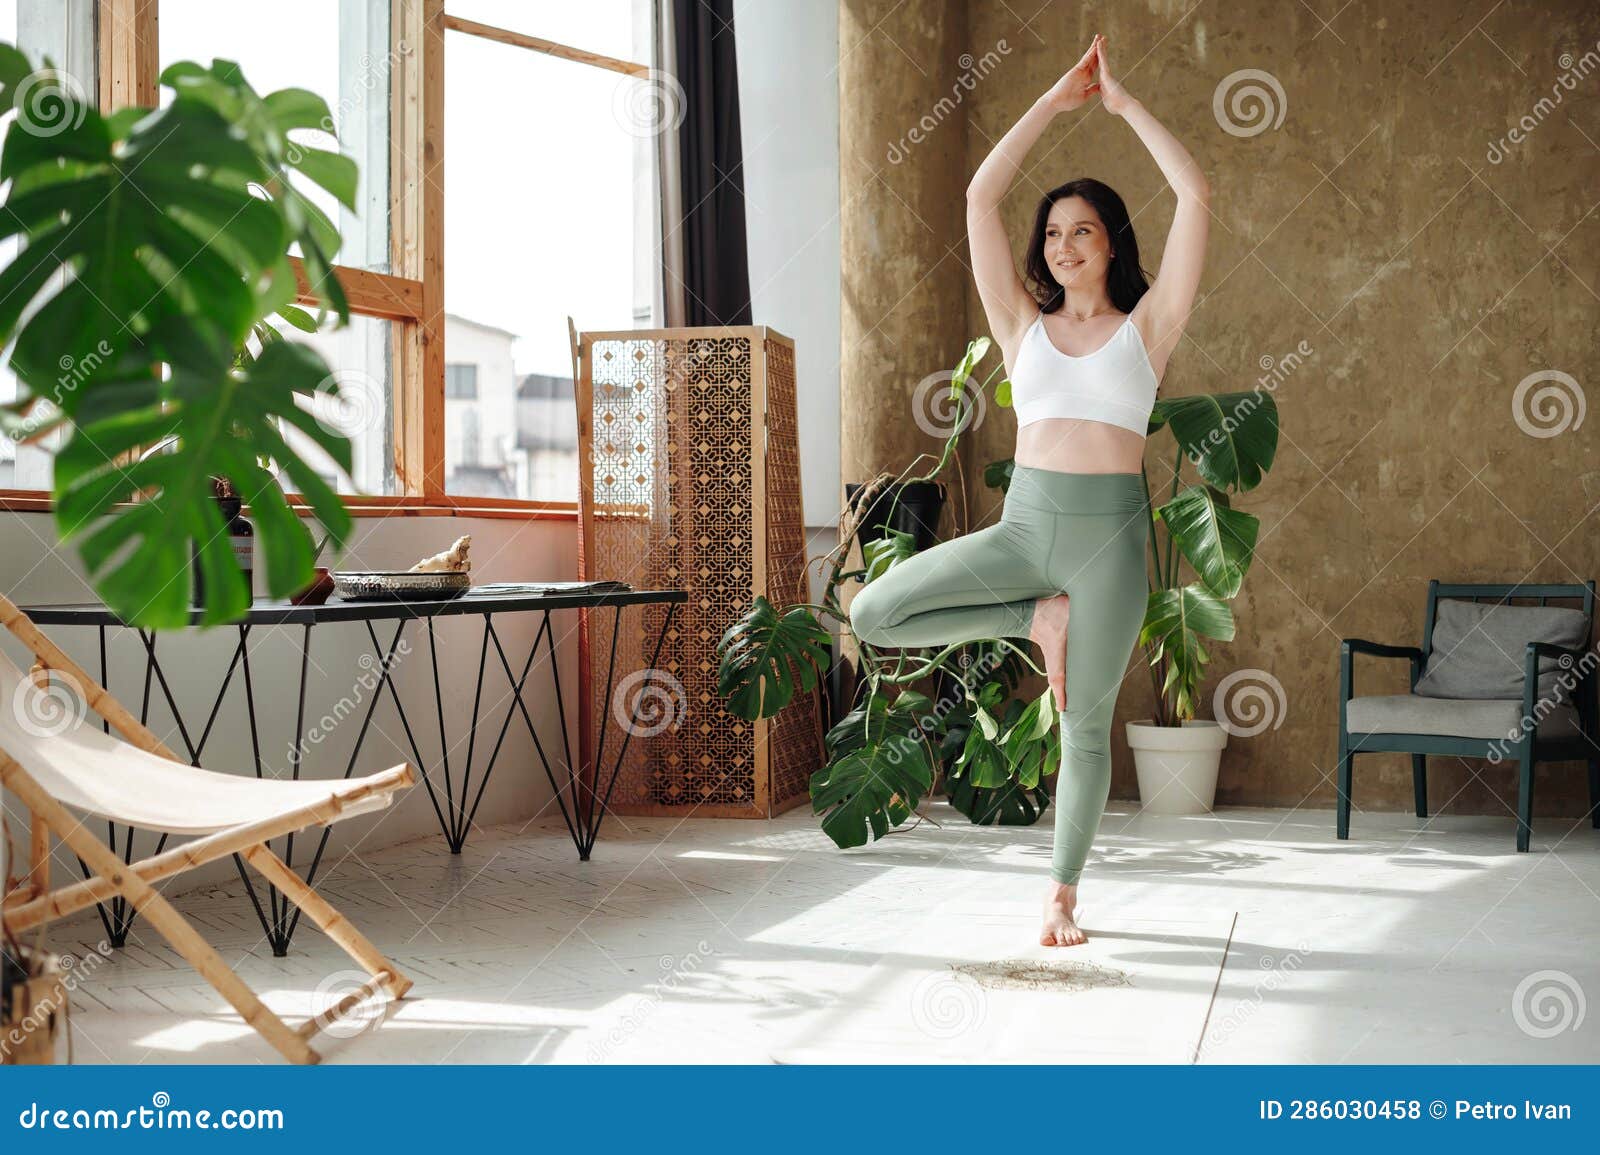 https://thumbs.dreamstime.com/z/smiling-pretty-woman-standing-one-leg-practicing-tree-yoga-pose-cozy-atmospheric-place-fit-slender-female-doing-286030458.jpg